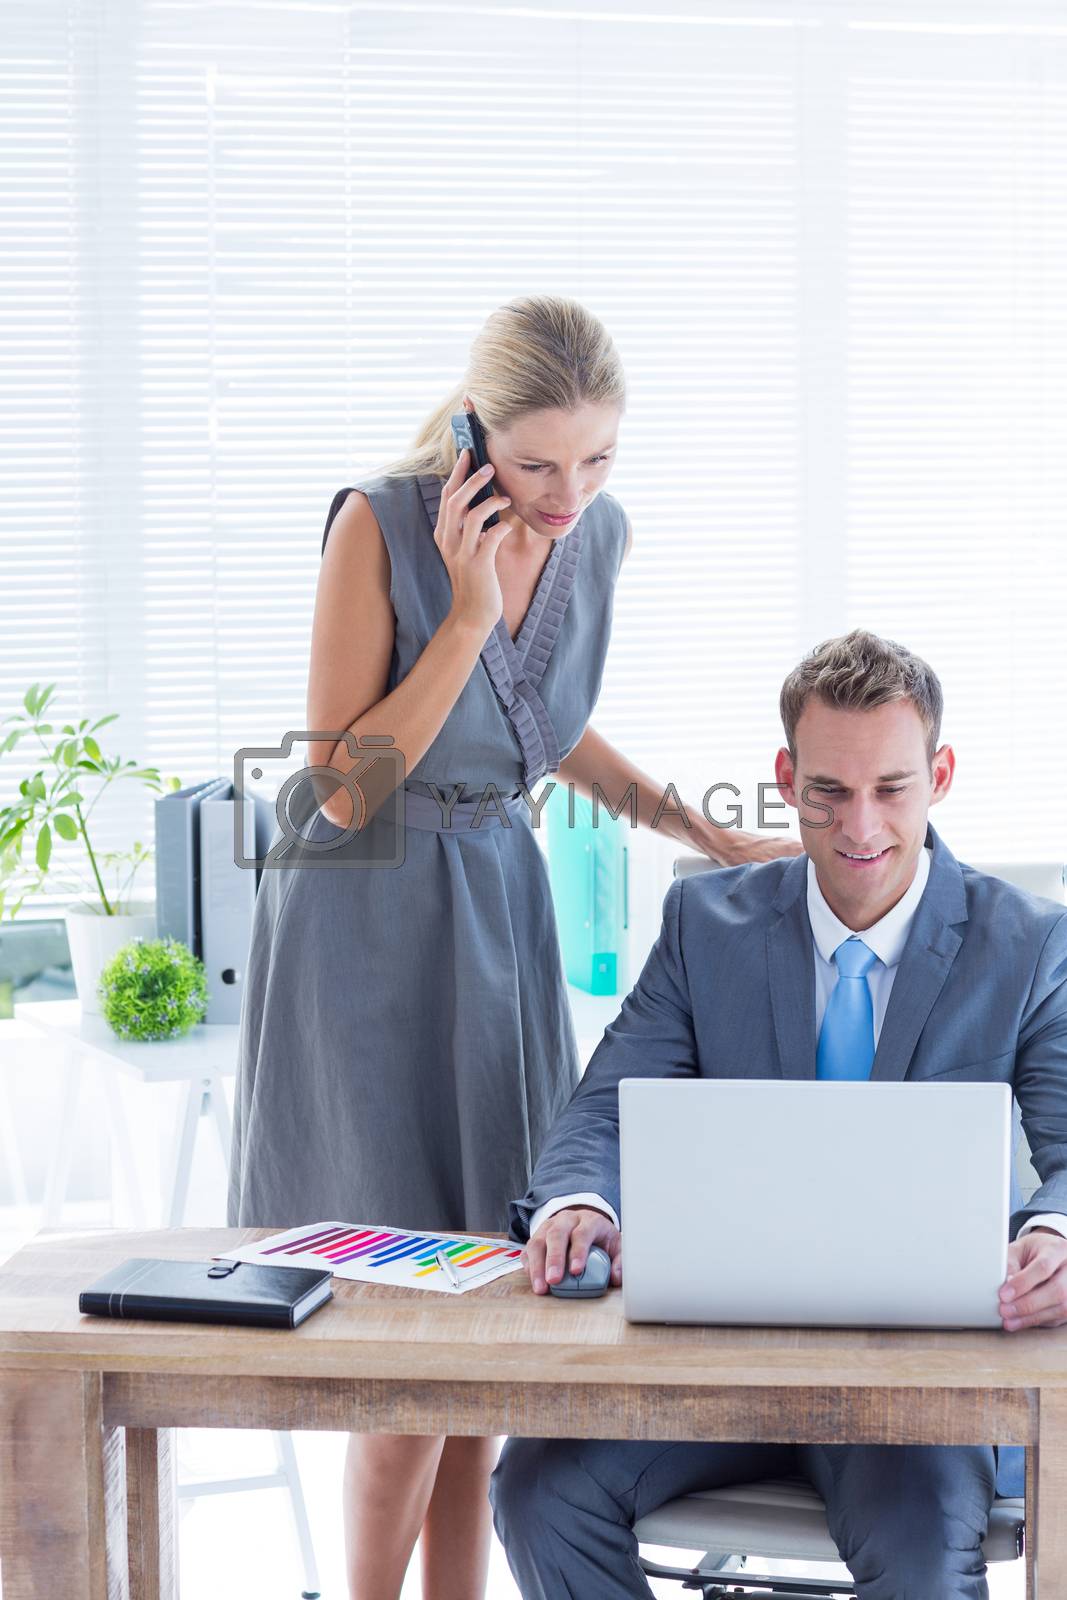 Royalty free image of Business people working together on laptop by Wavebreakmedia